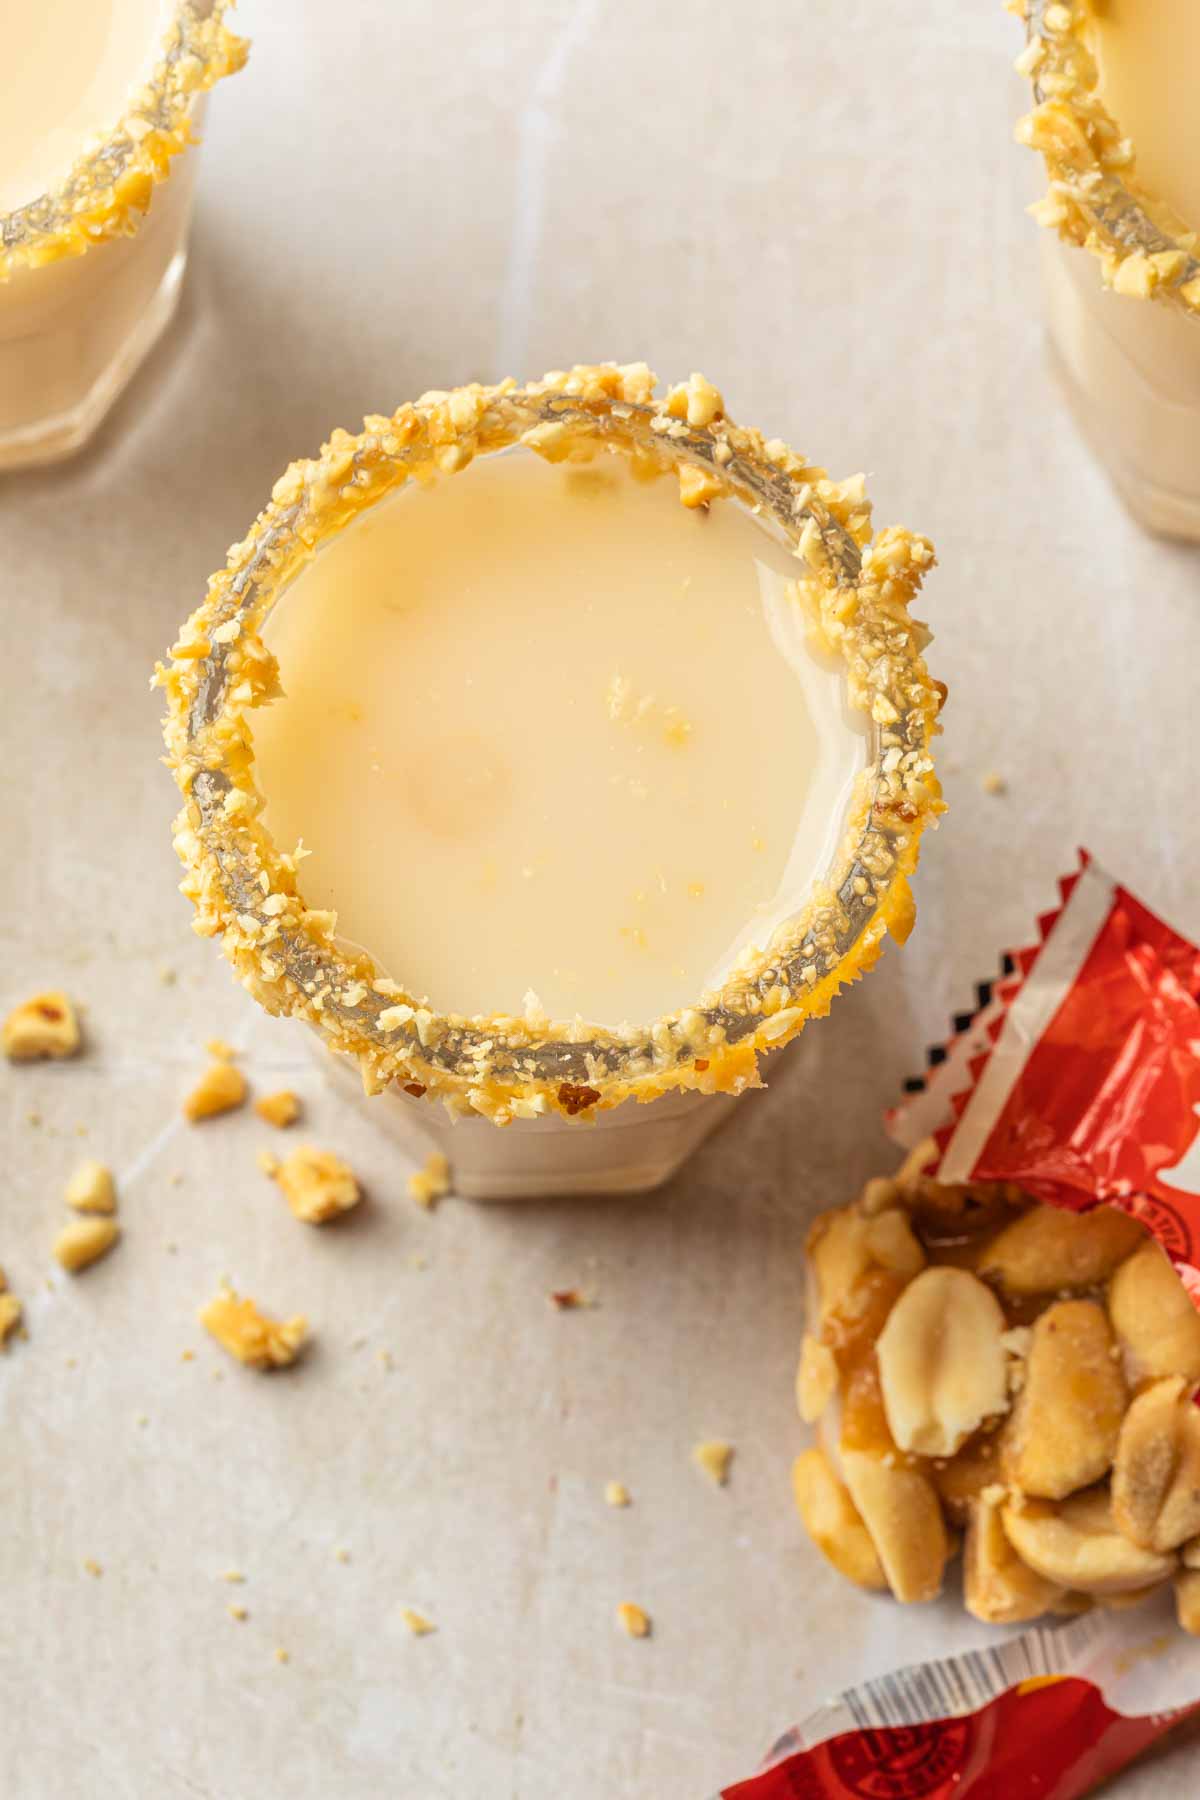 A salted nut roll shot in a shot glass rimmed with peanuts next to an open nut roll candy bar. 